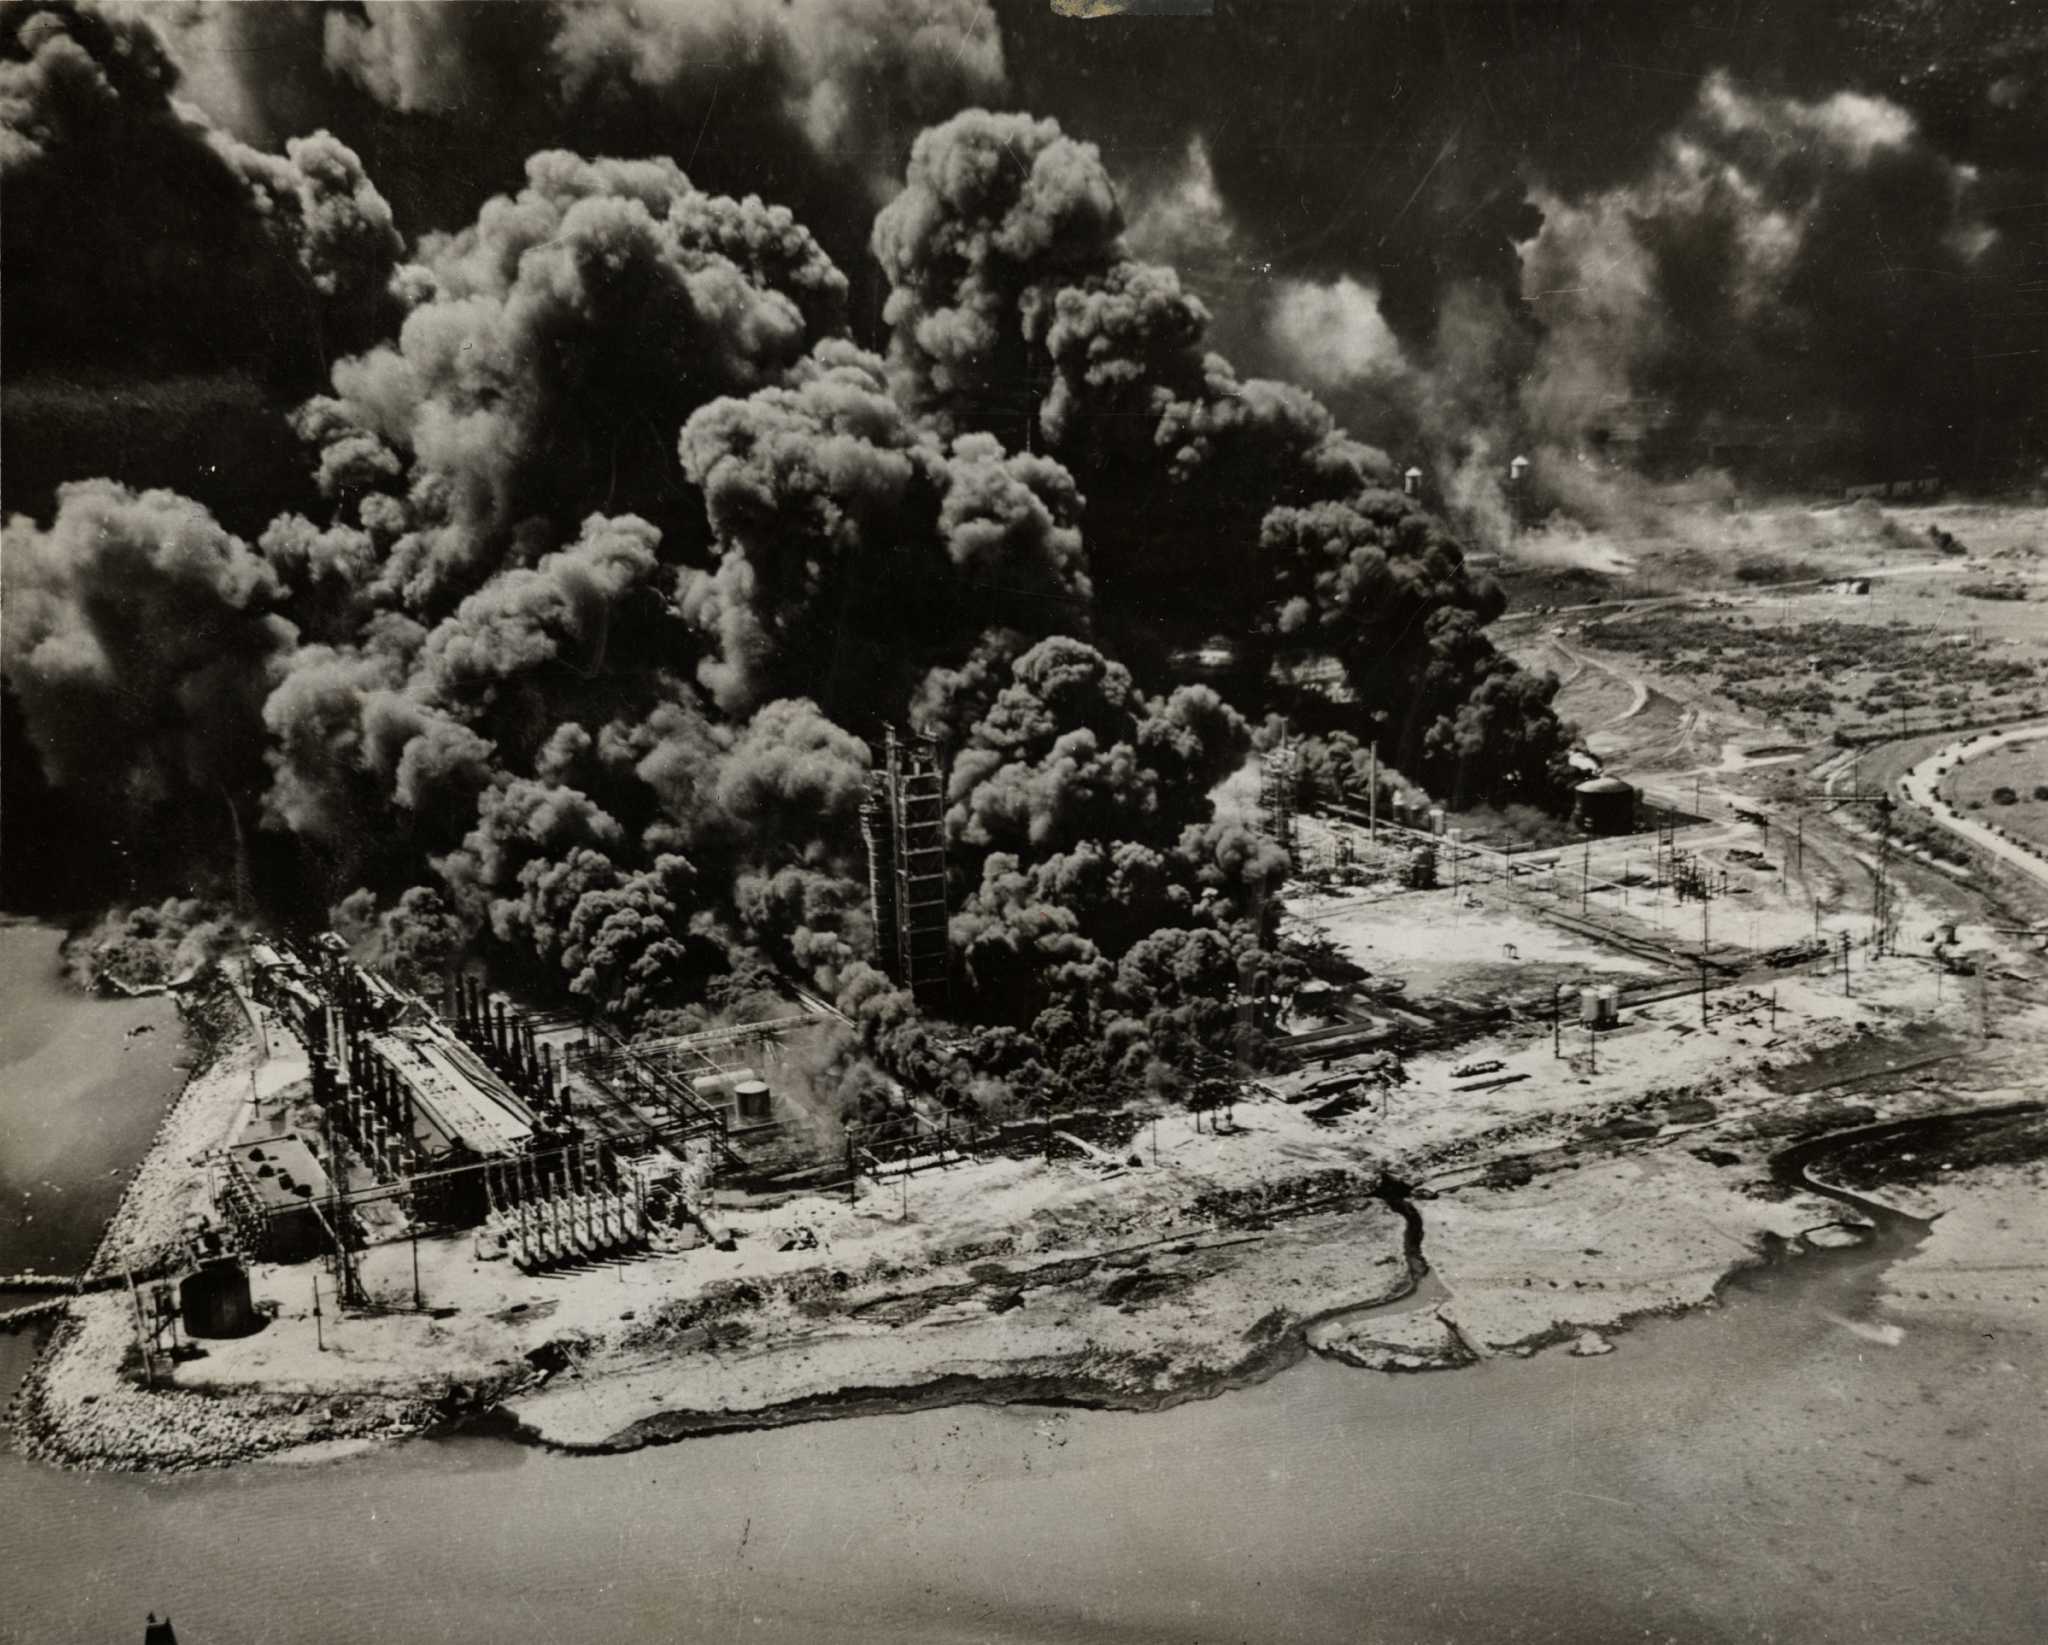 75 years ago, the Texas City Disaster devastated a community